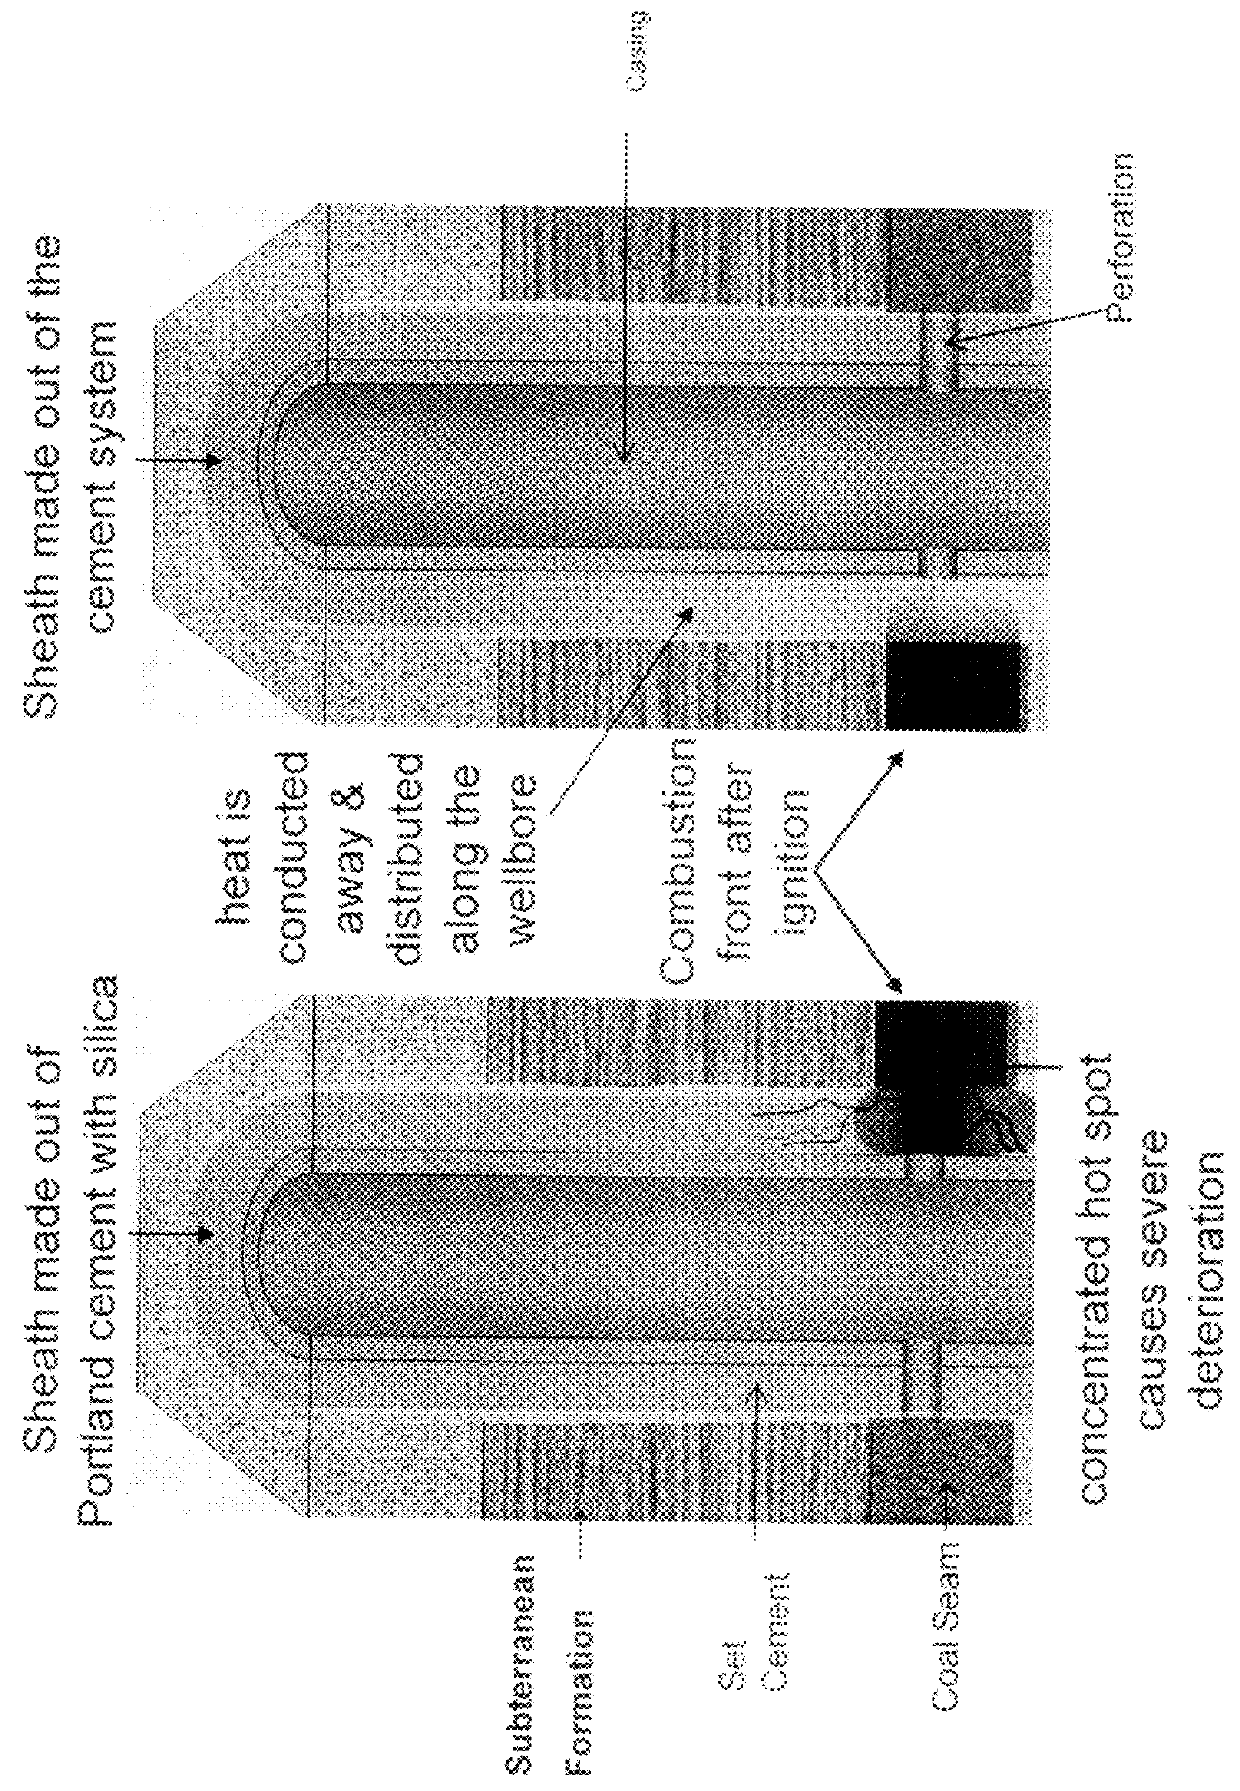 Application of a specialized slurry used for cementing tubulars in wells producing synthesis gas by underground coal gasification